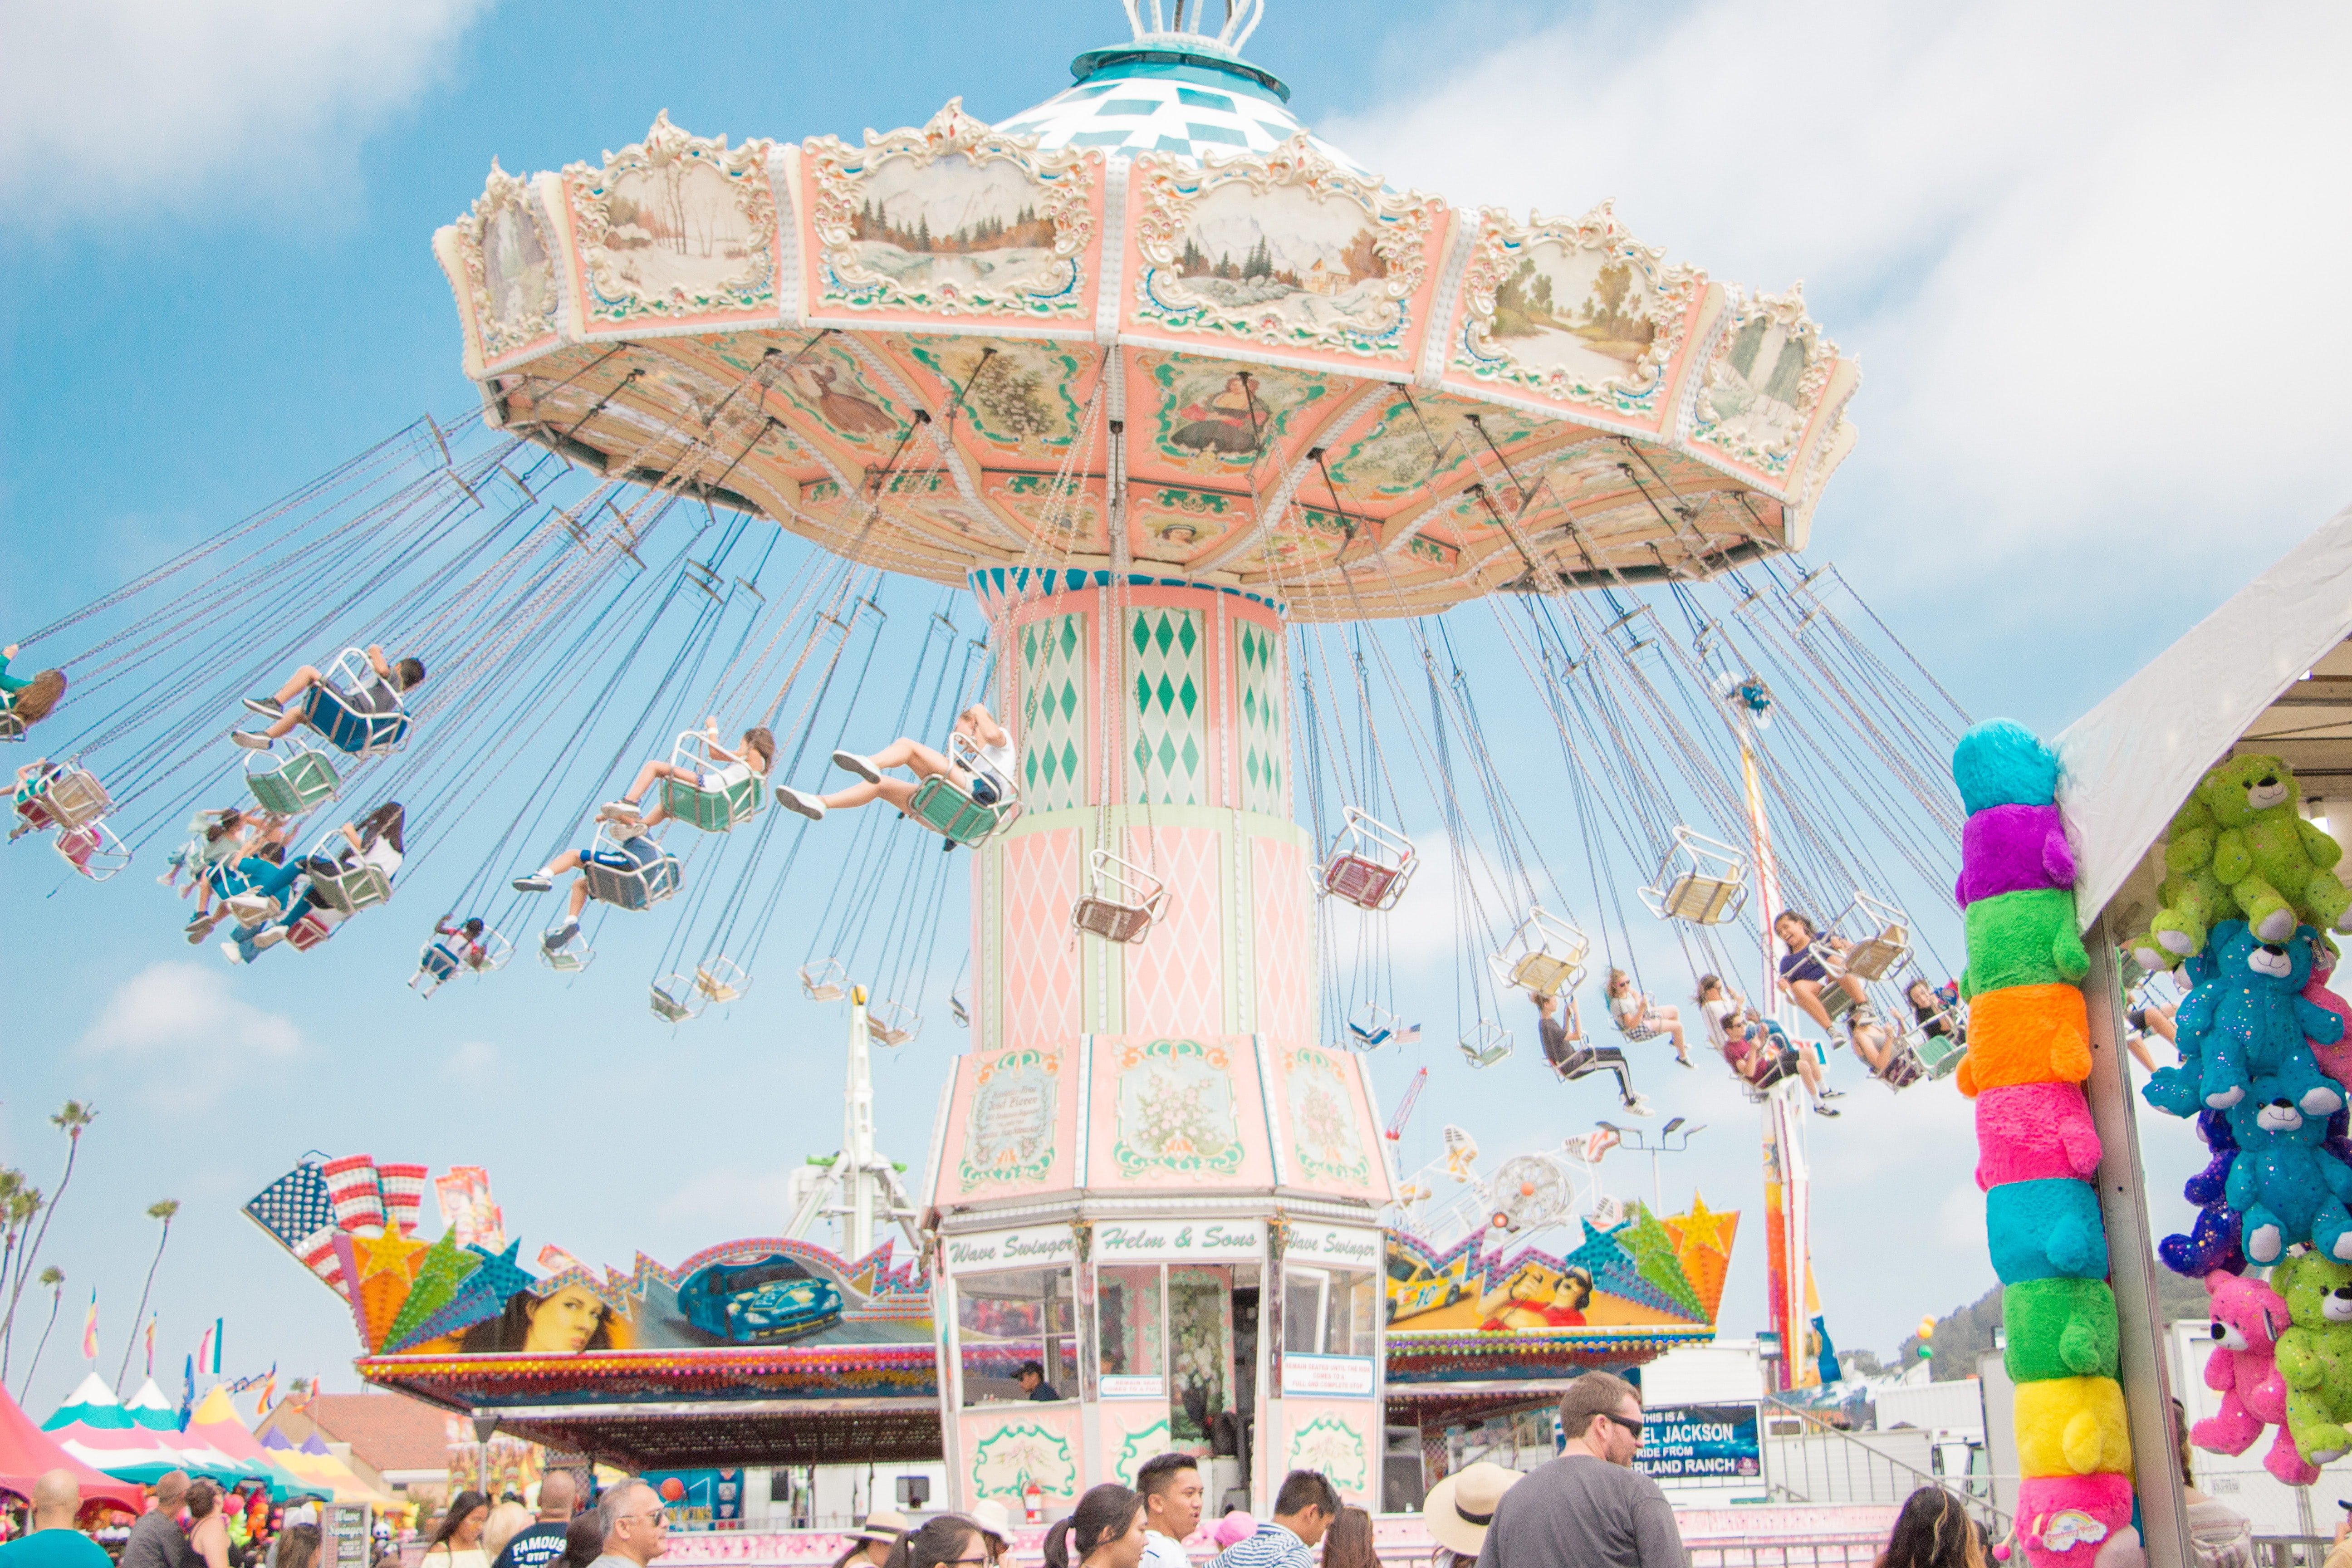 Erin took Adrian to a carnival for his 4th birthday. | Source: Unsplash